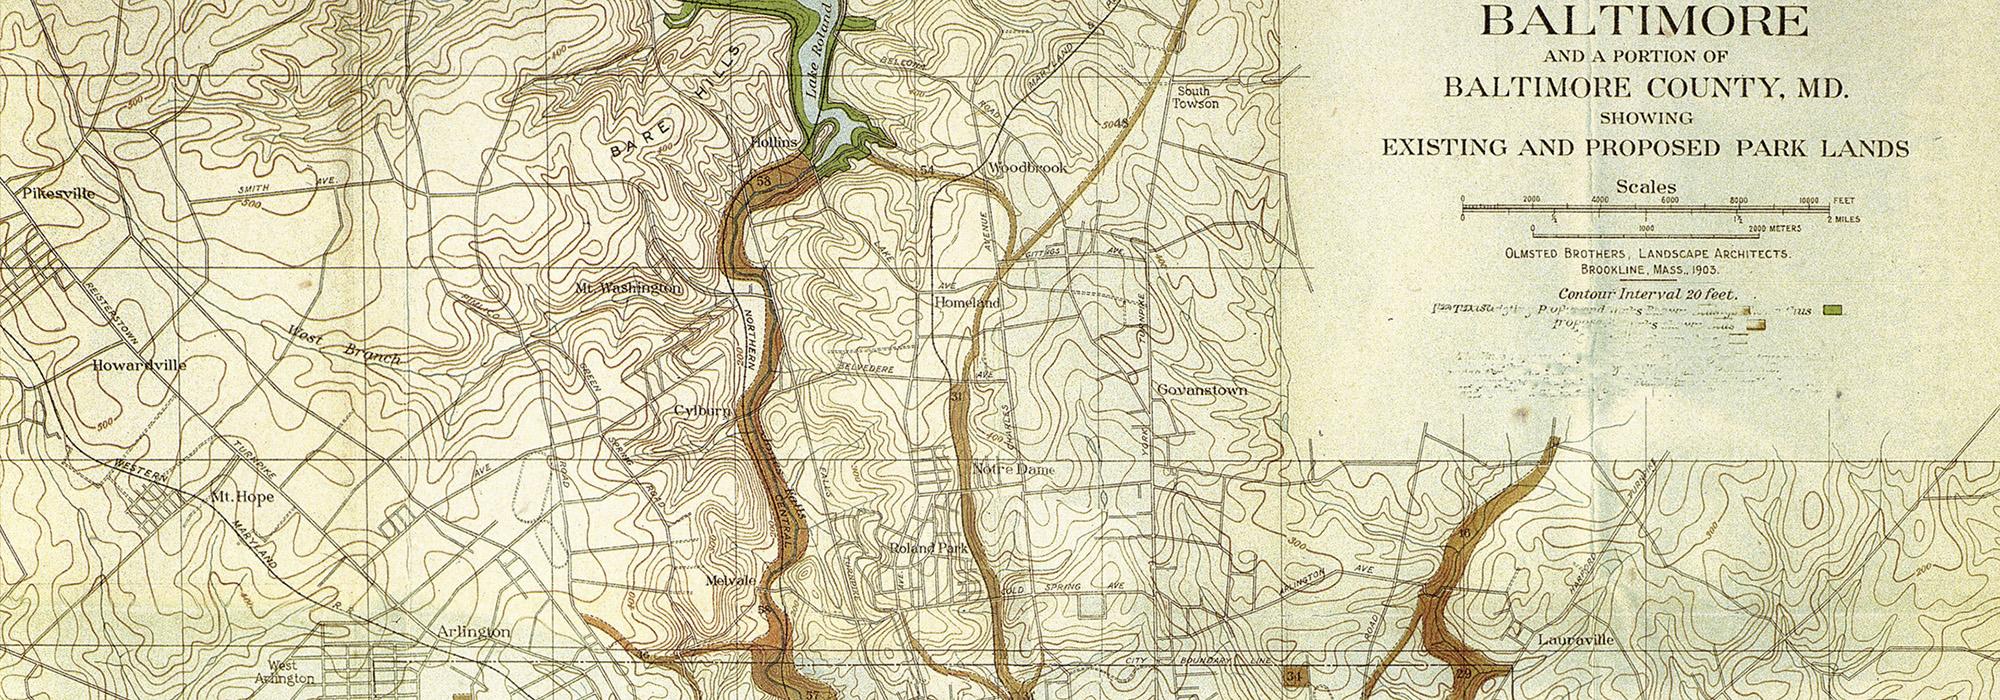 Plan of Baltimore and Portion of Baltimore County, Baltimore, MD